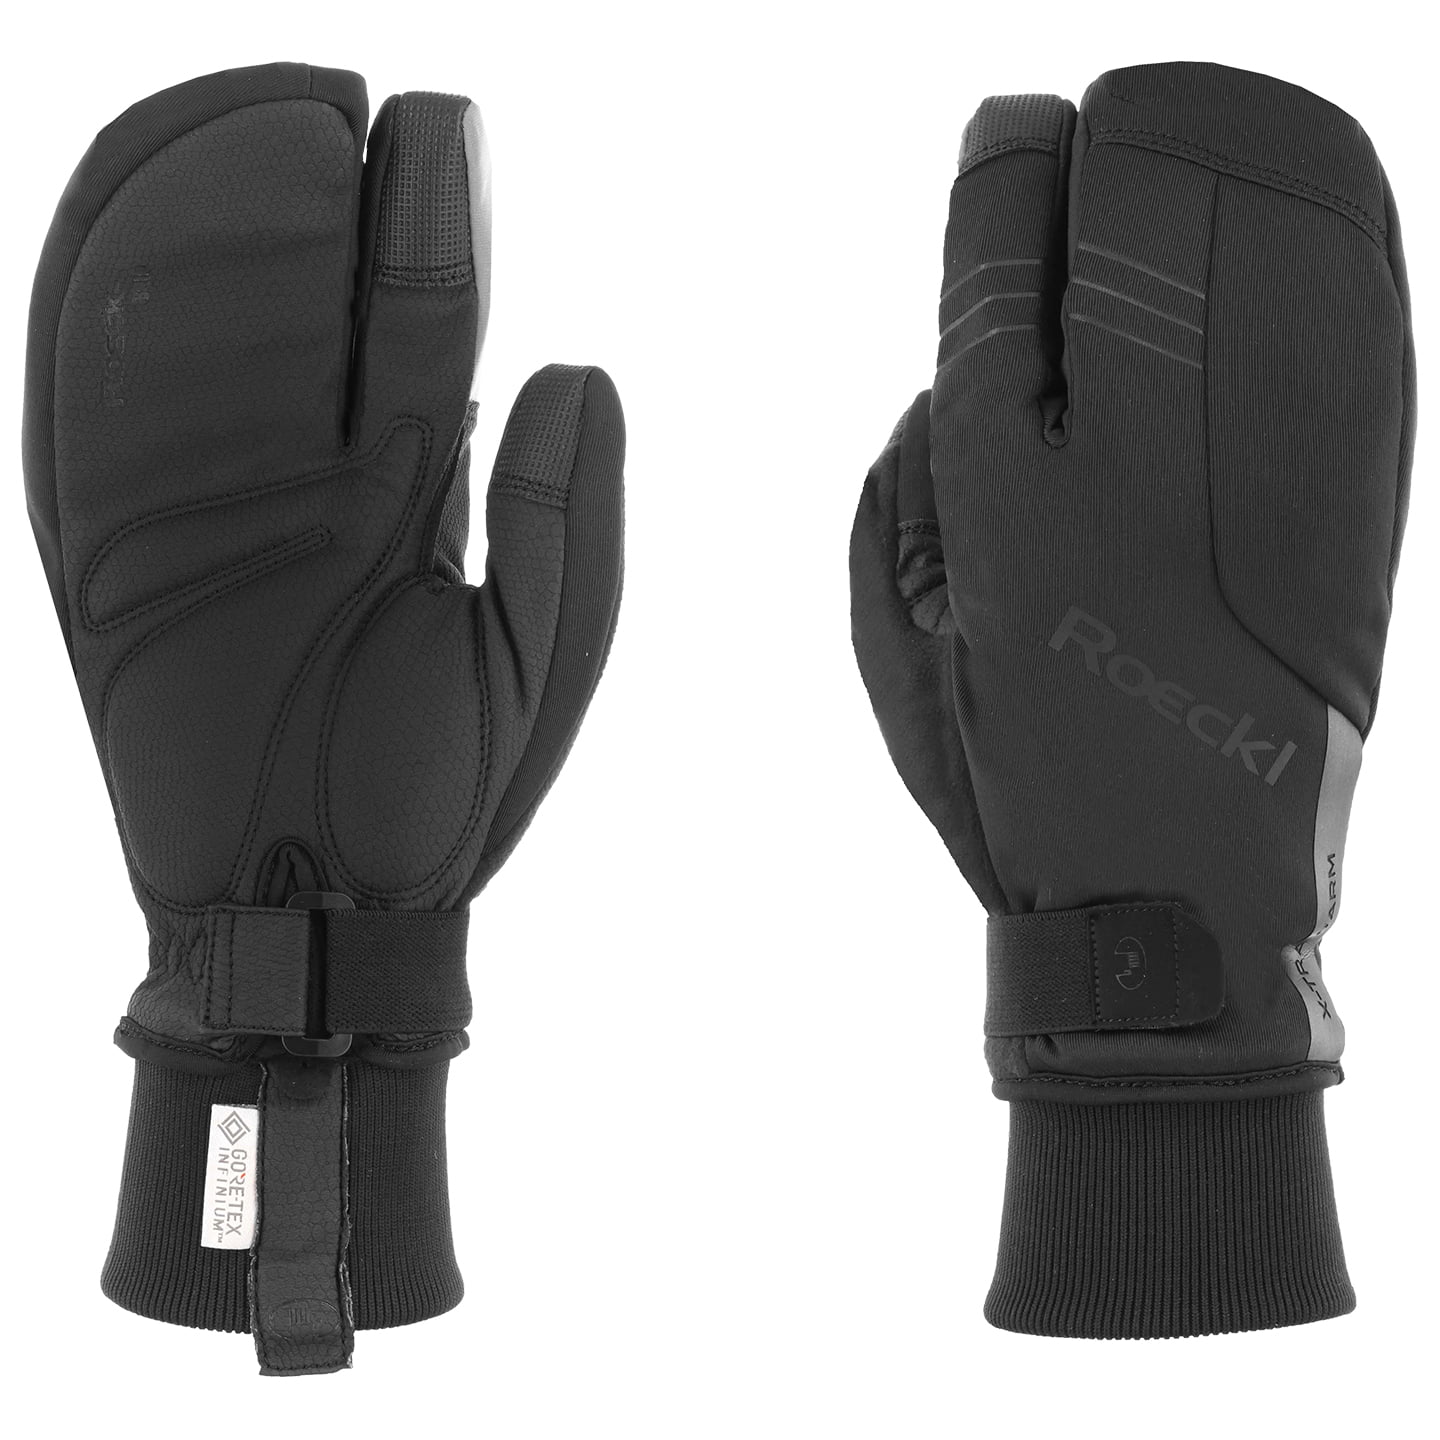 ROECKL Villach 2 Trigger Winter Gloves Winter Cycling Gloves, for men, size 6,5, MTB gloves, Bike clothes